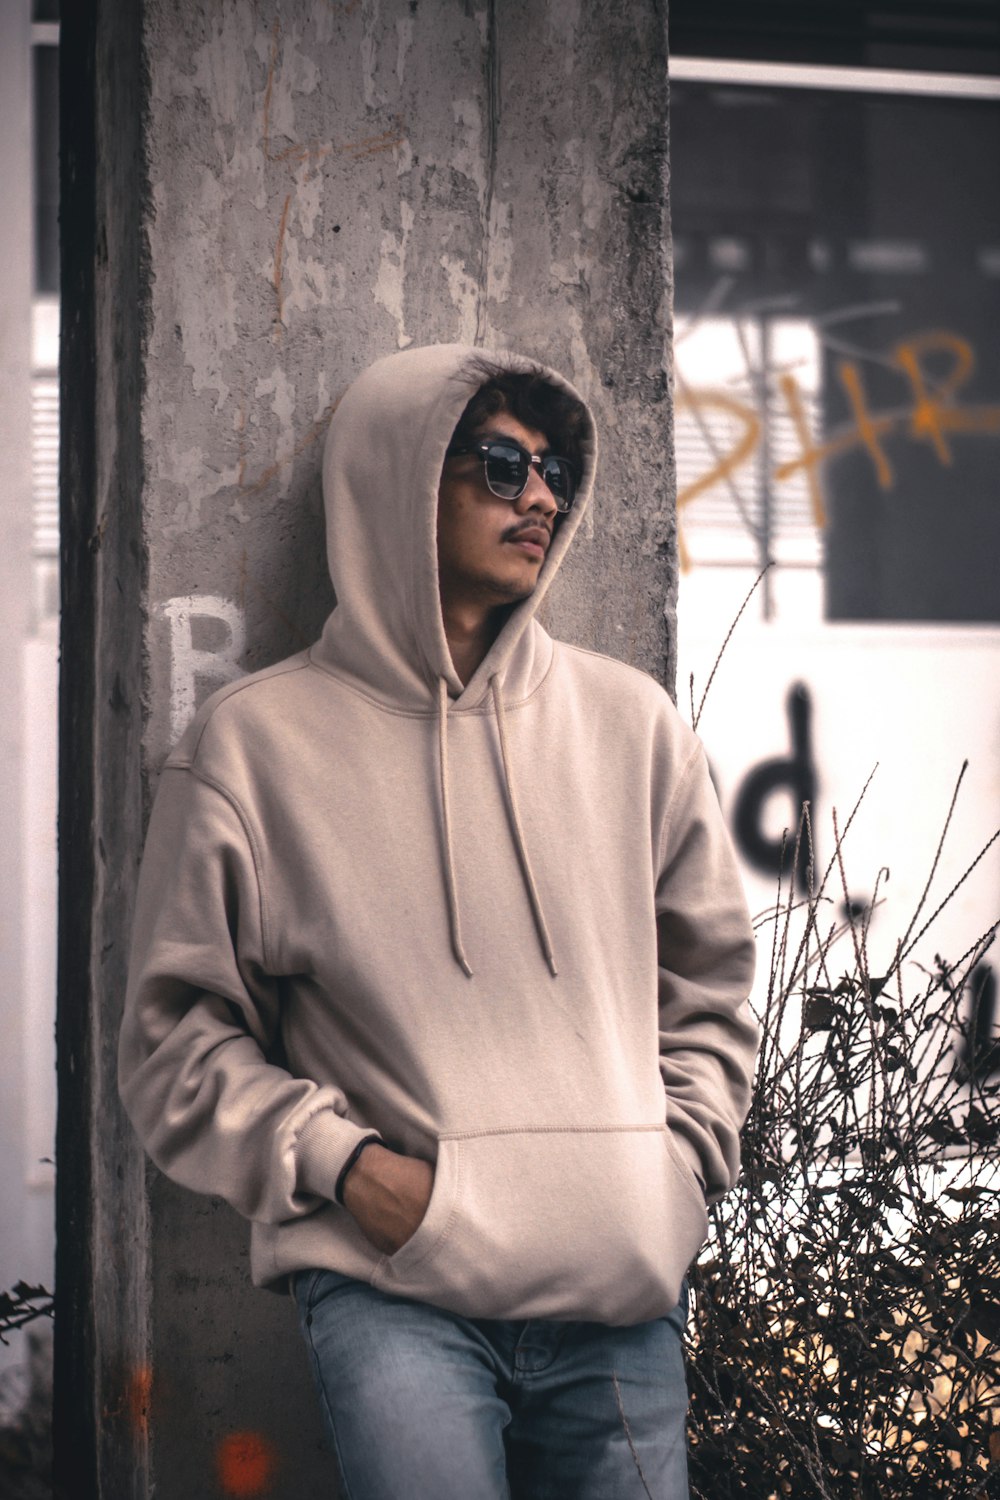 27+ Hoodie Pictures | Download Free Images & Stock Photos on Unsplash